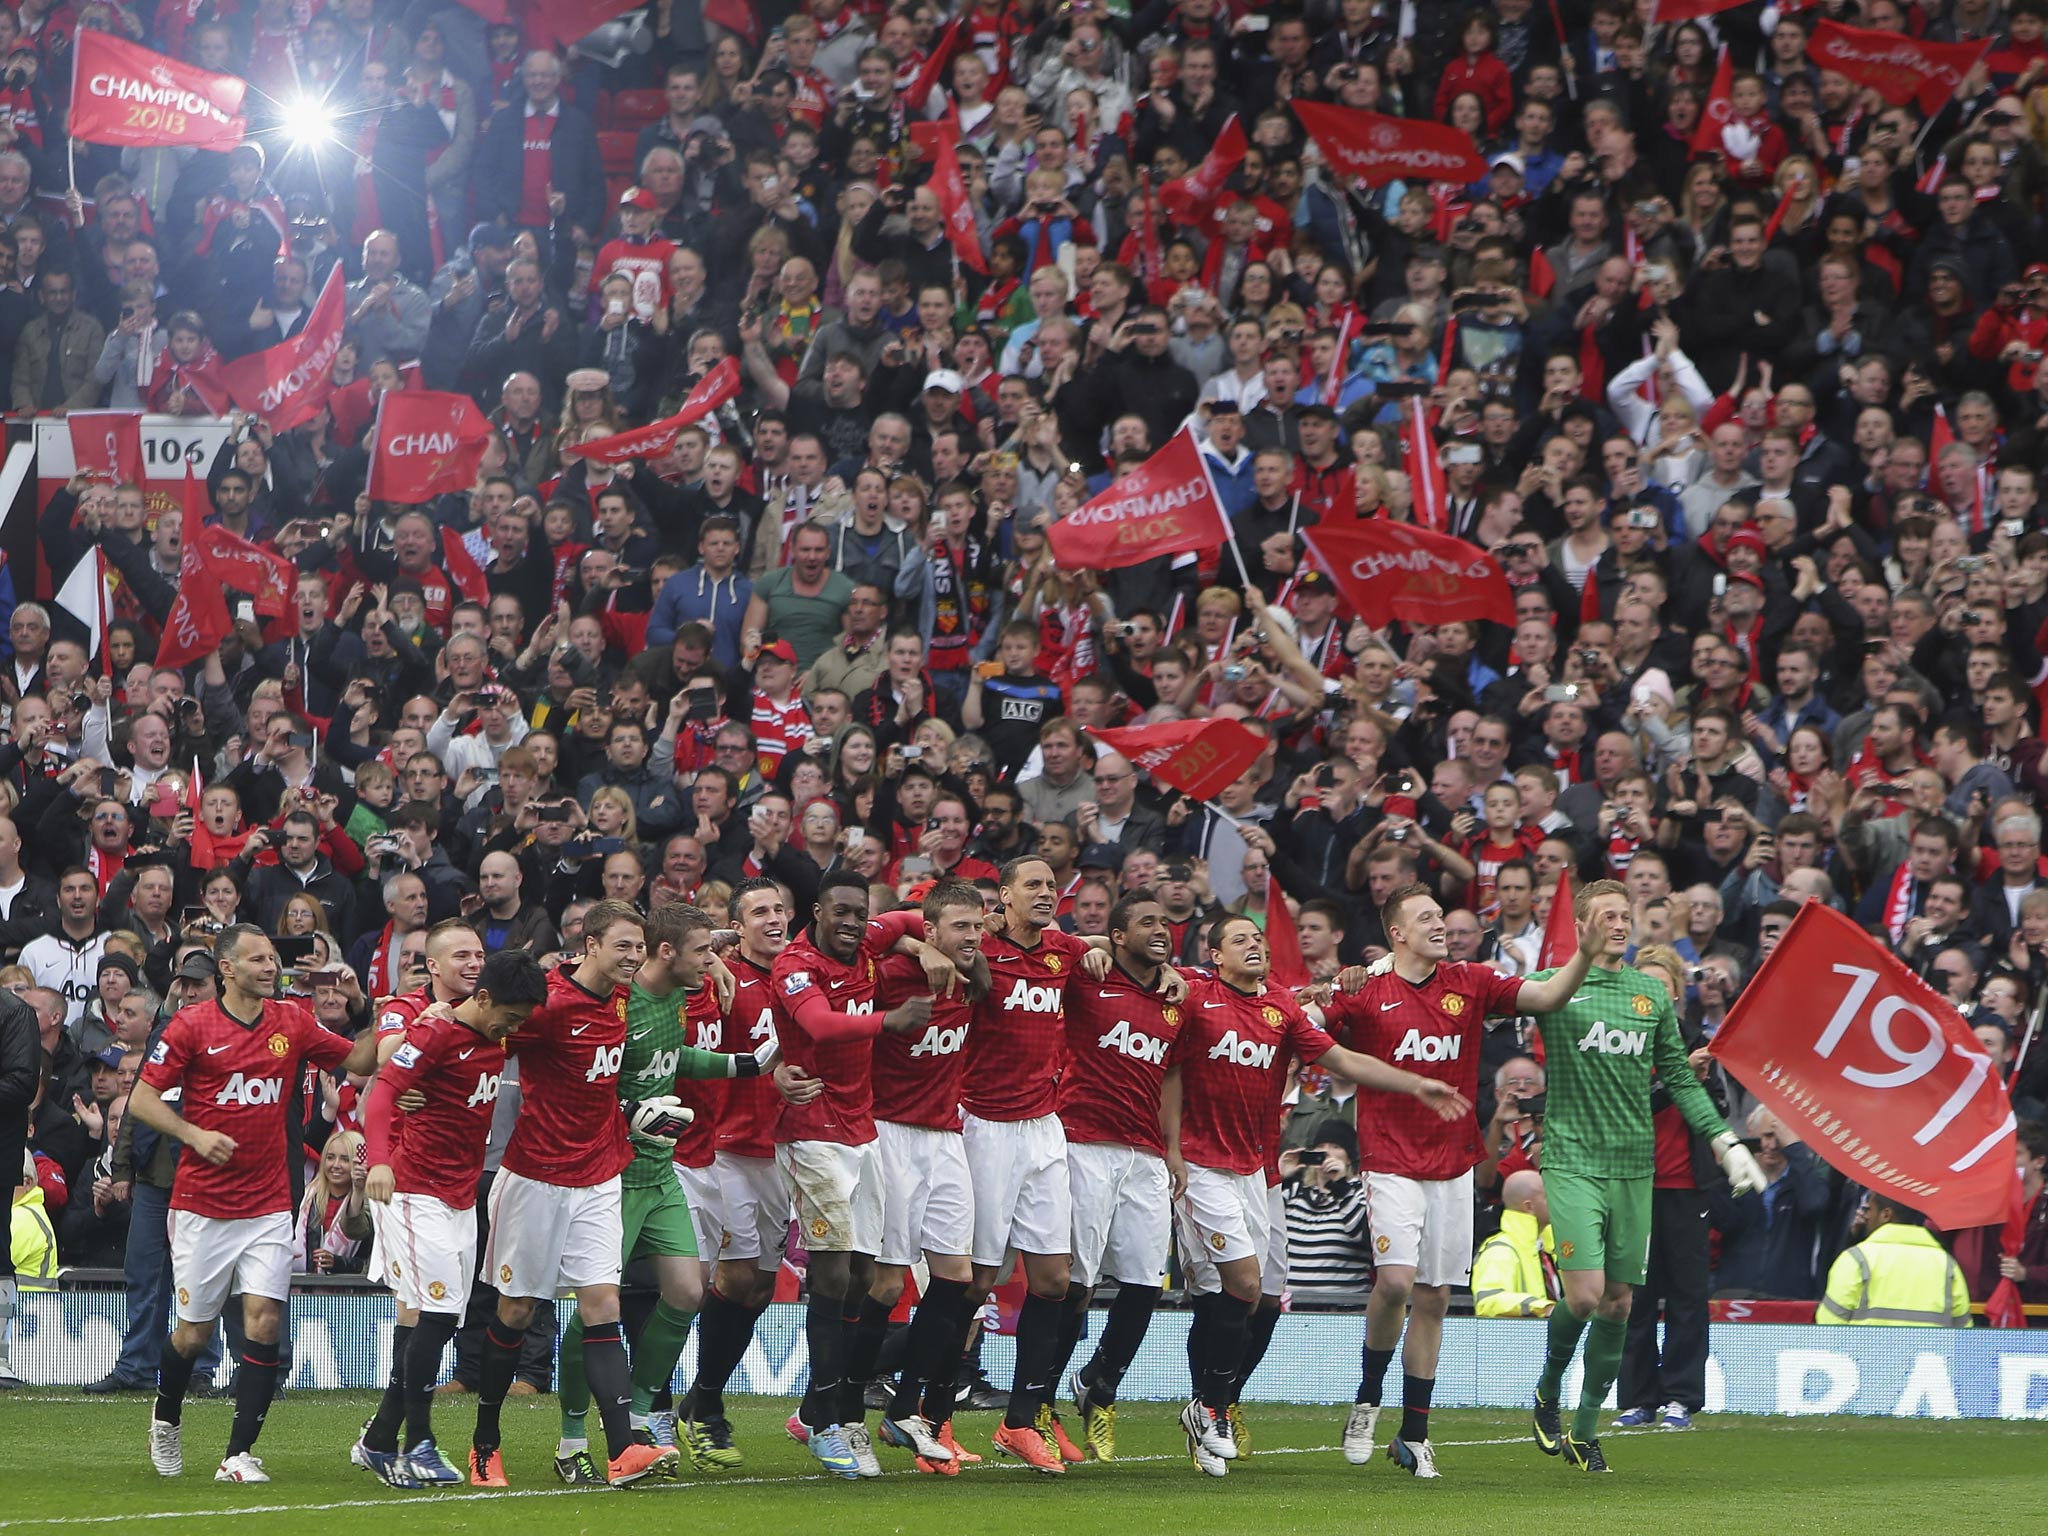 Manchester United celebrate after winning the 2012/13 tournament